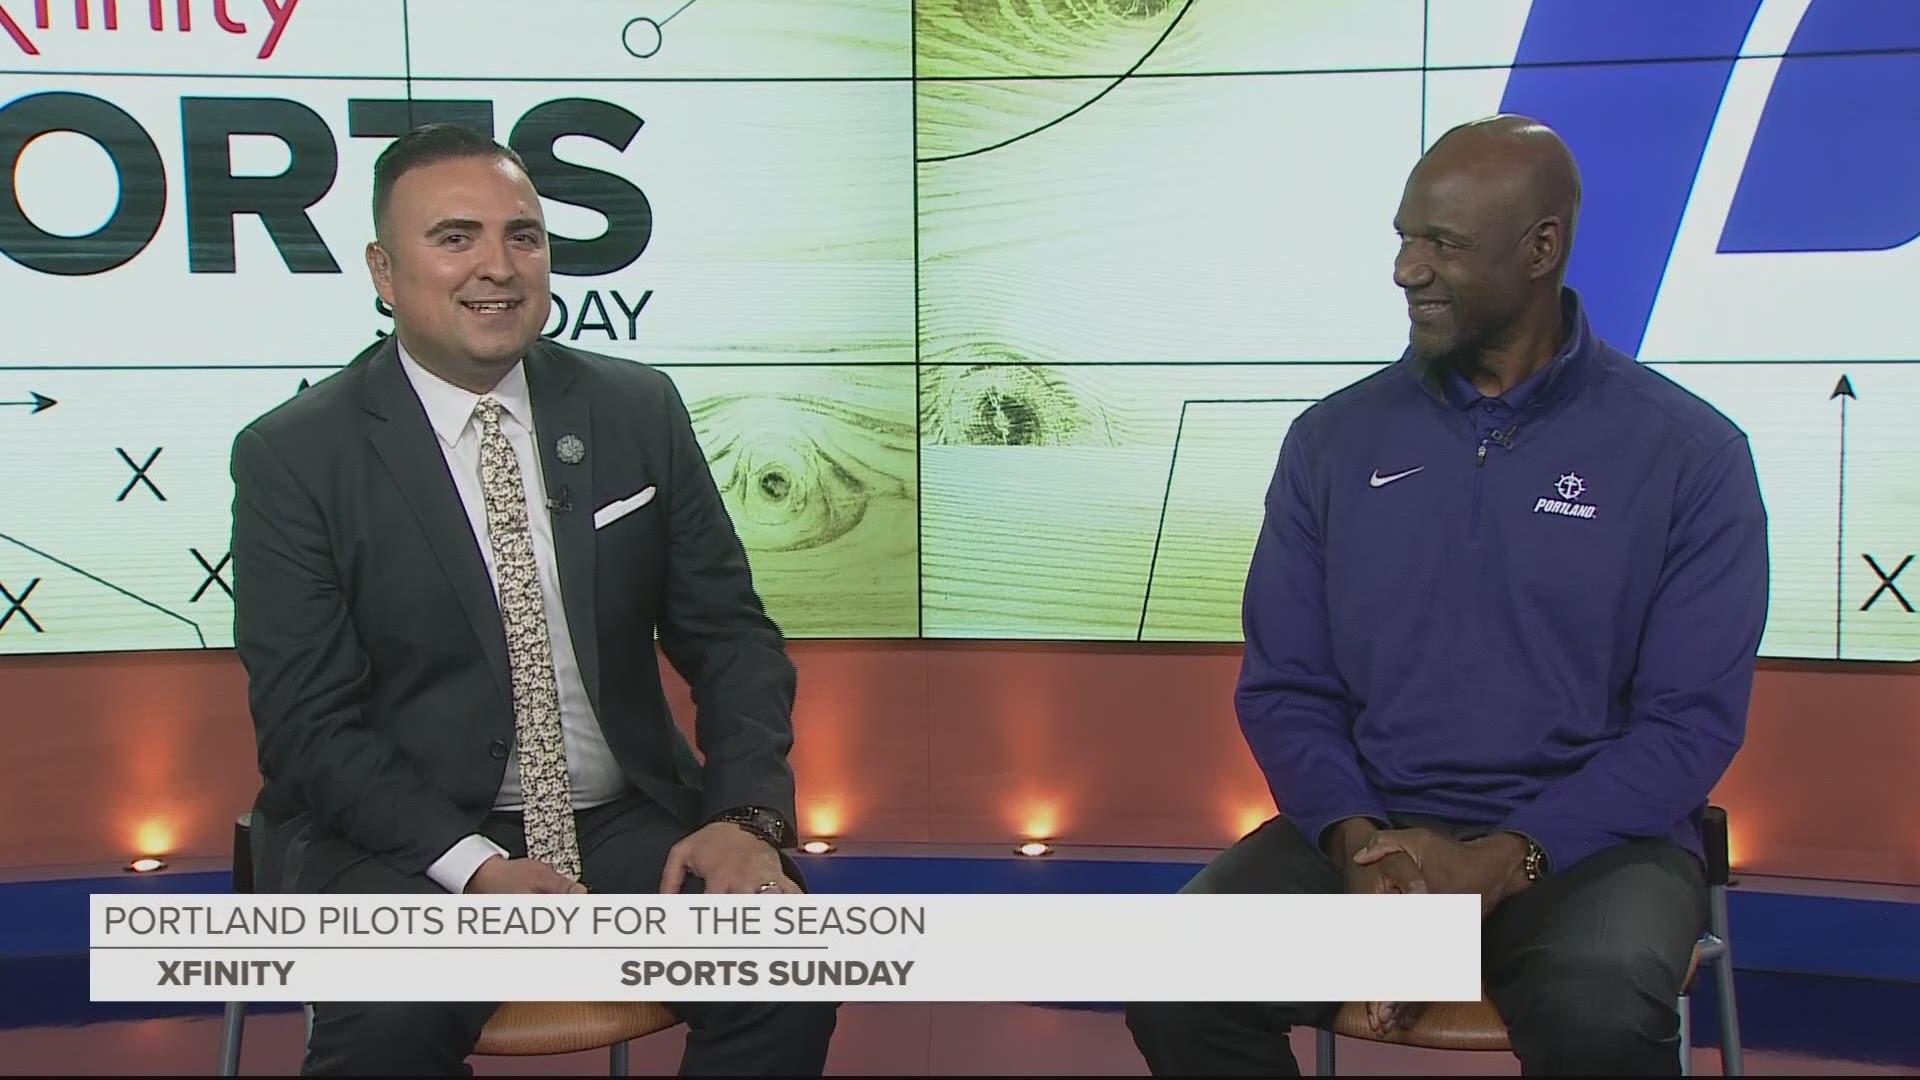 Terry Porter sat down with KGW's Orlando Sanchez for an interview on Sports Sunday.